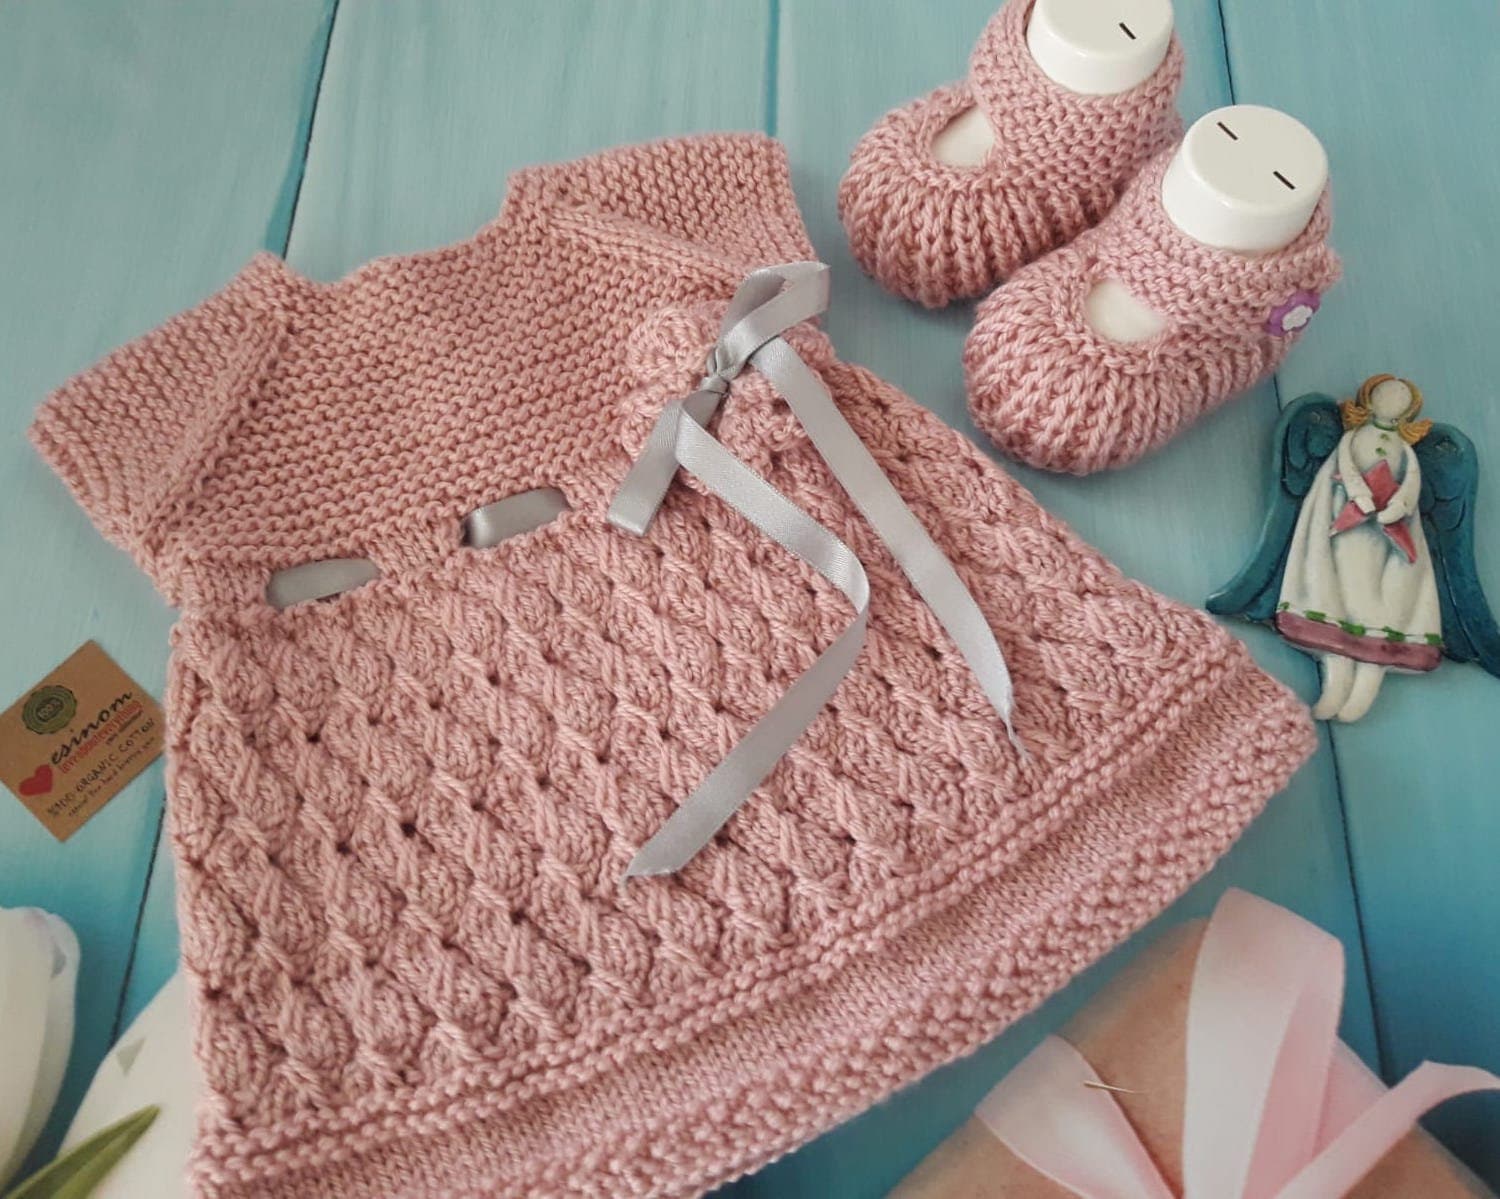 Buy Magic Knit Baby Pink Woolen Crochet Flowery Knee Length Frock Dress  Sweater for Baby Girl Hand Knitted at Amazonin